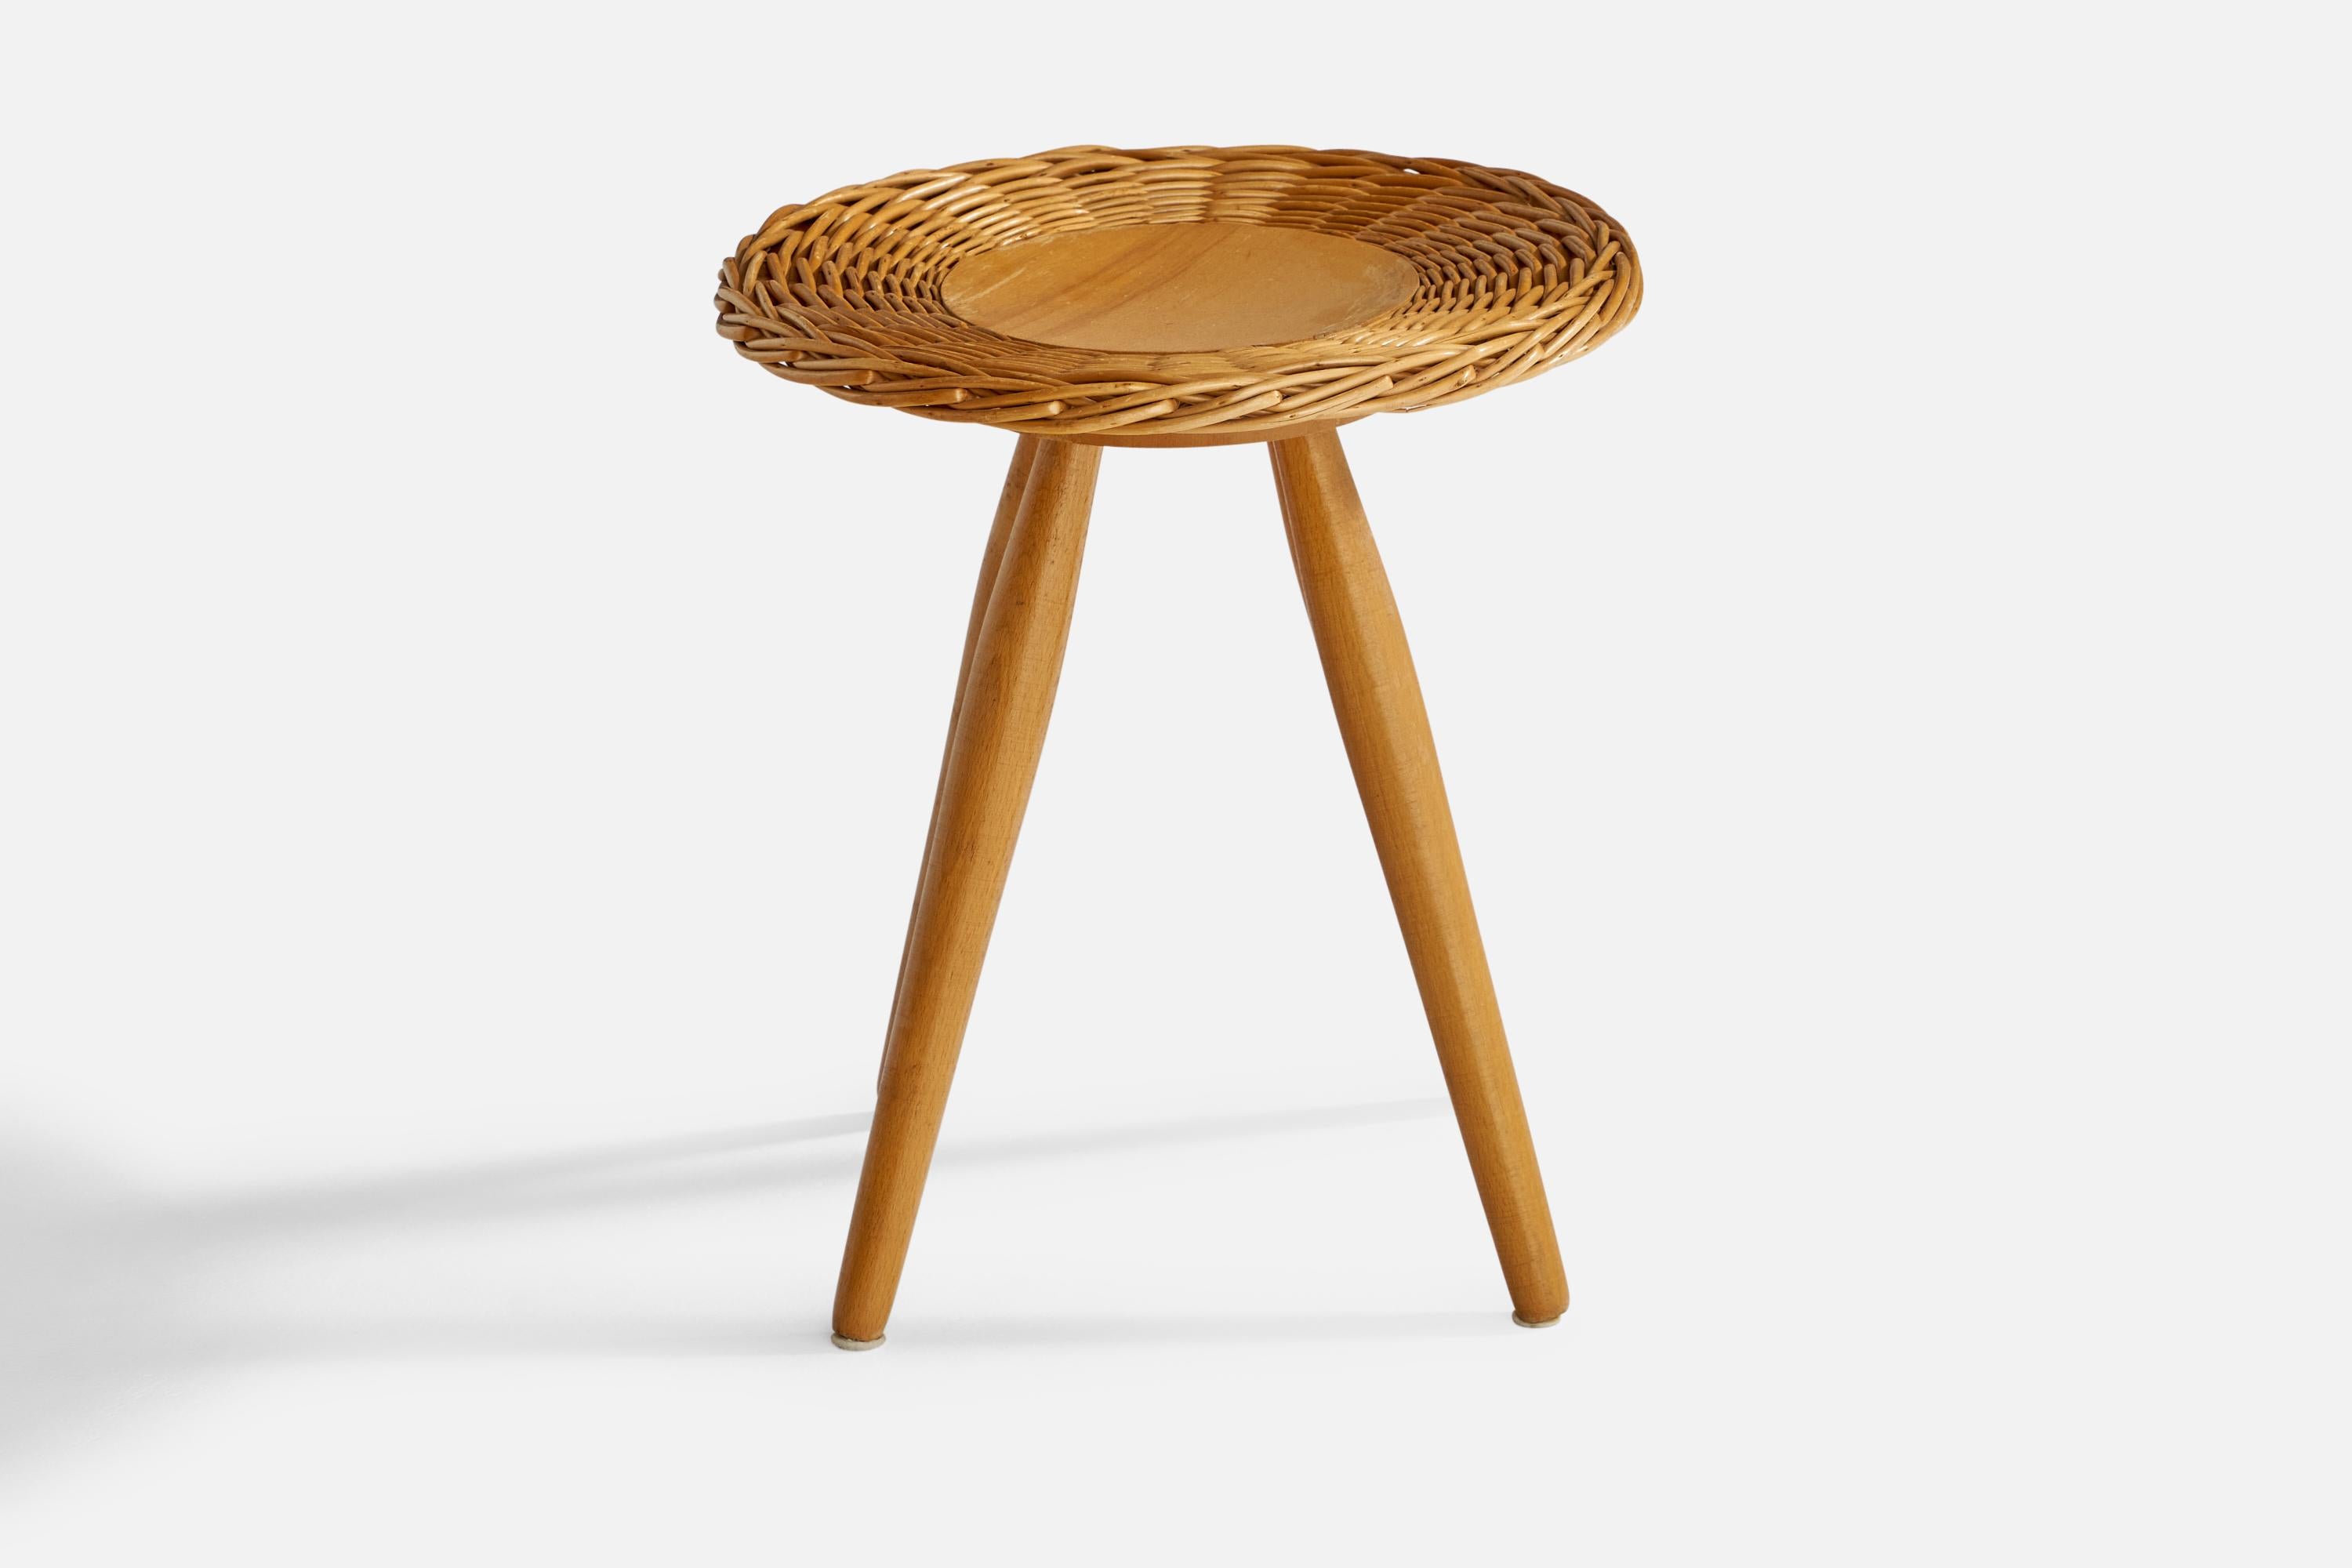 An oak and rattan stool designed and produced in the Czech Republic, 1950s.

Seat height: 15.95”